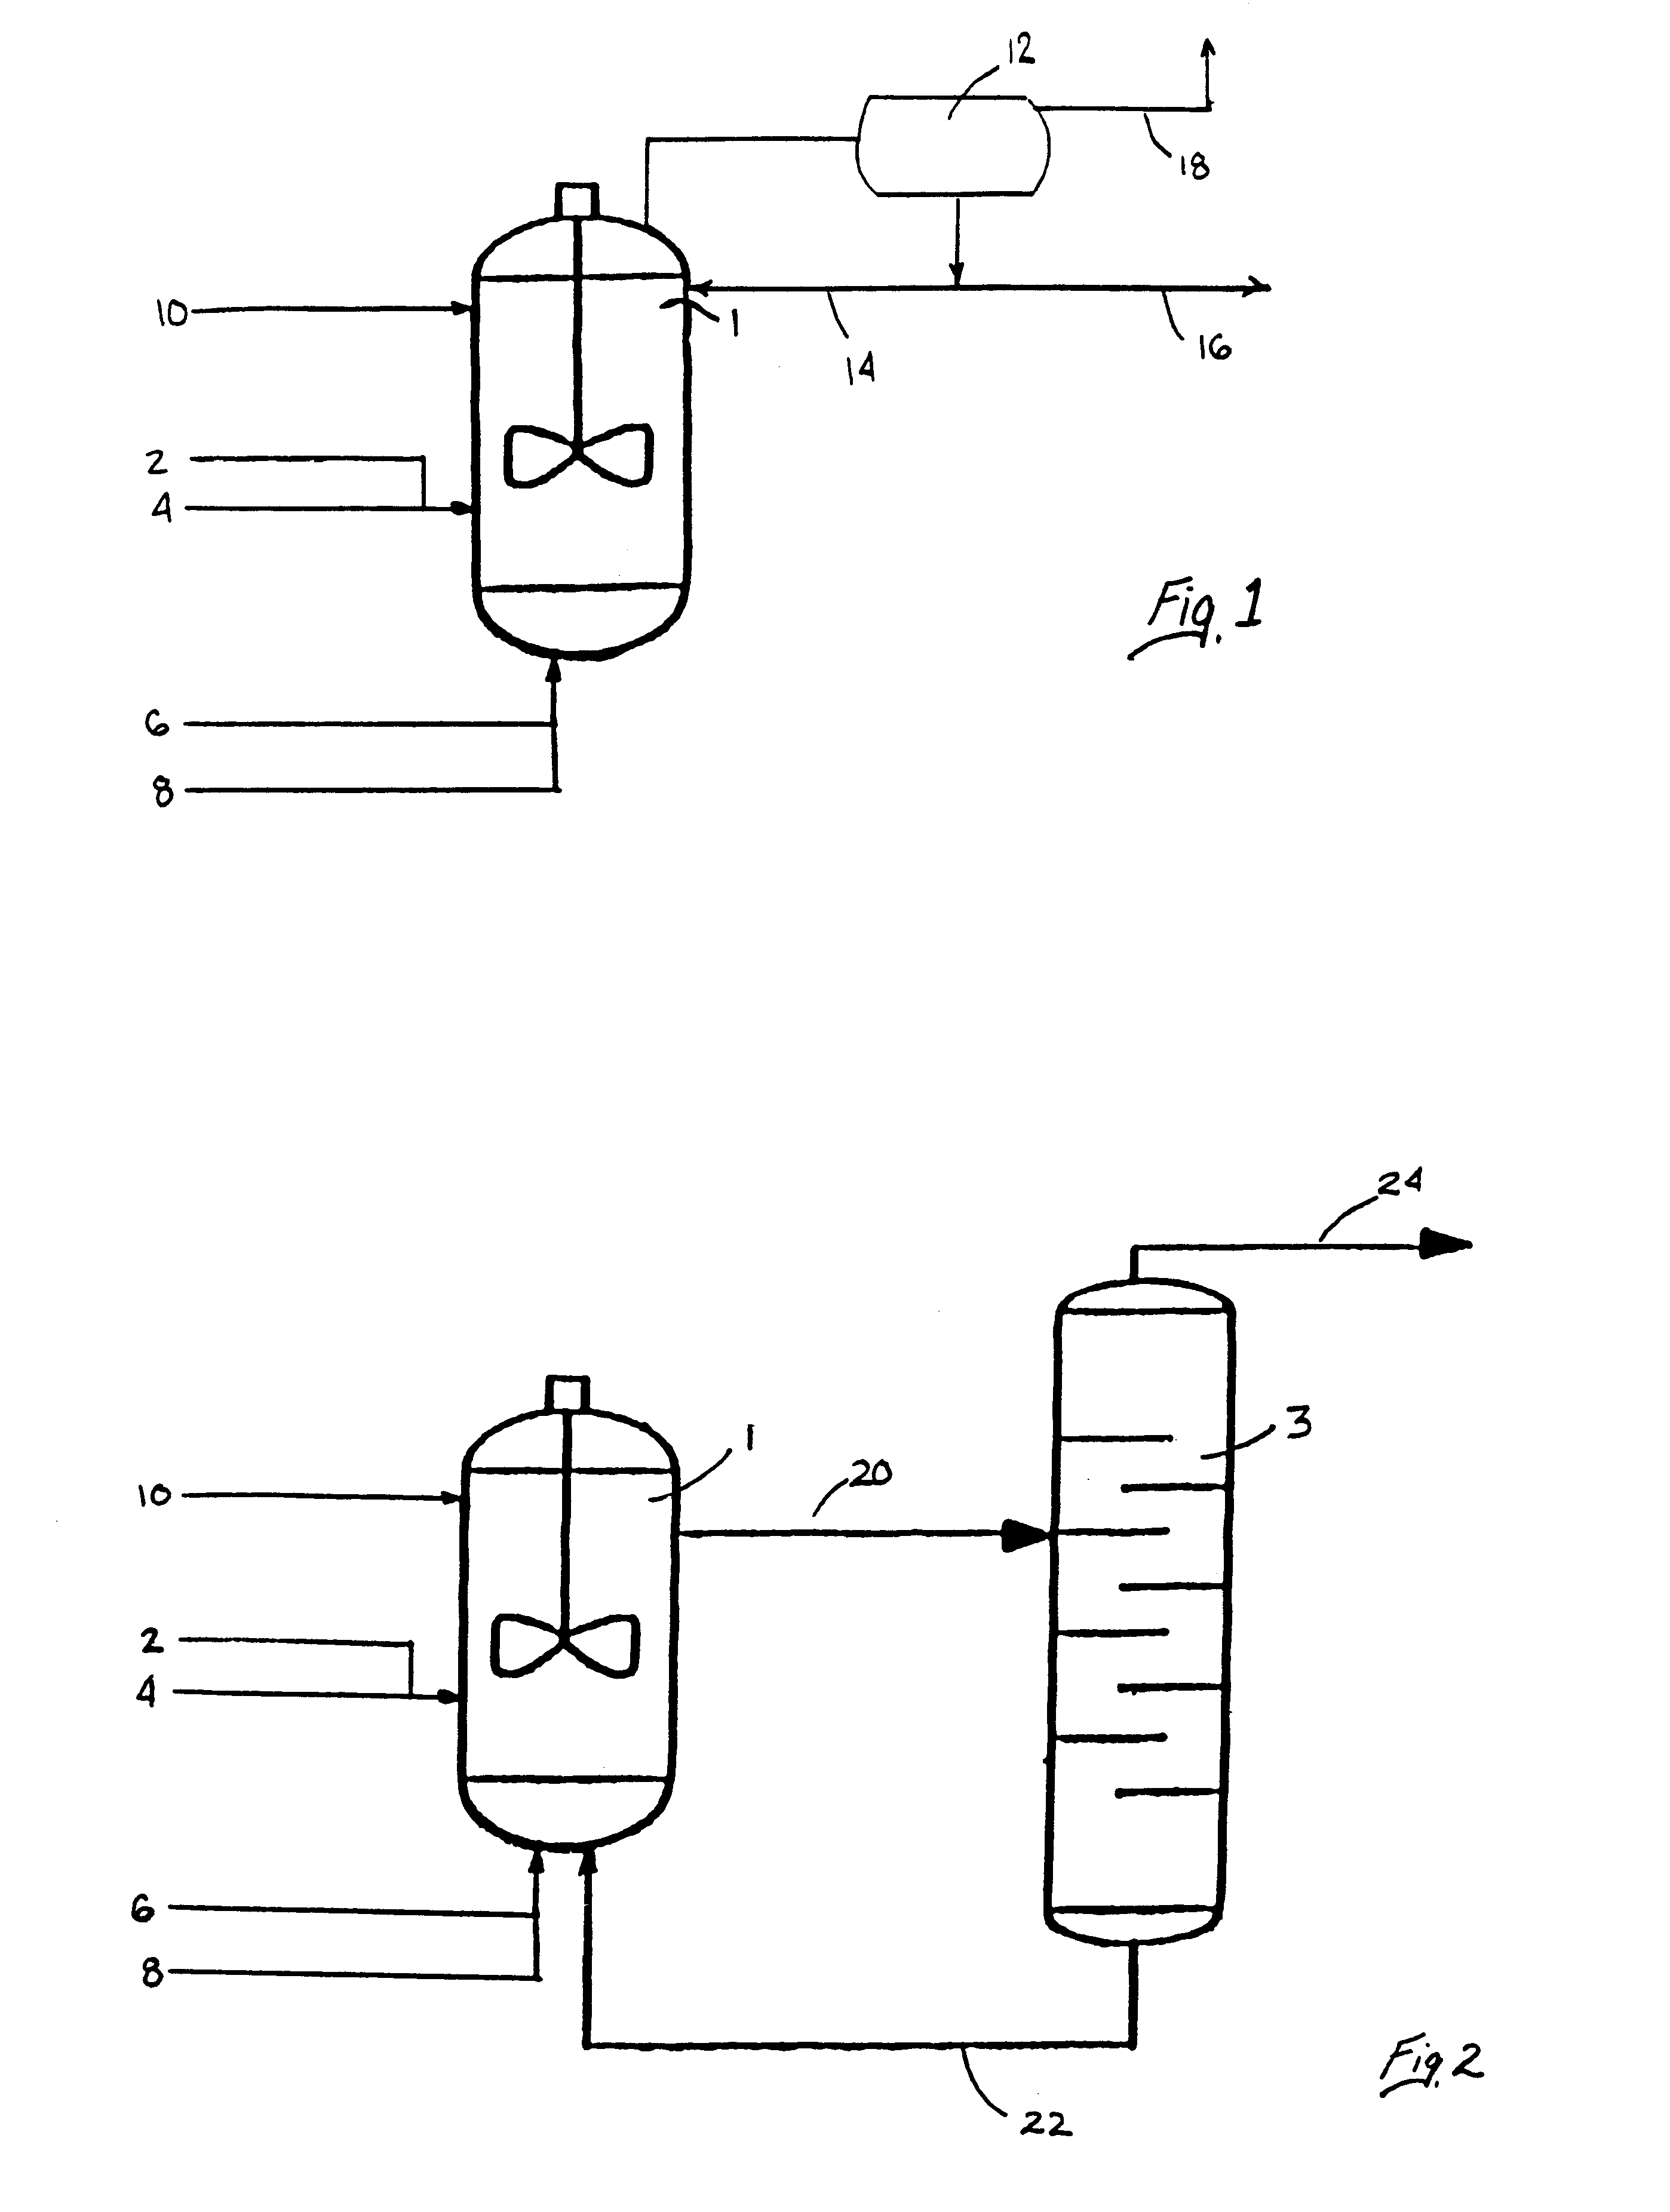 Process for forming vinyl ester from carboxylic acid with water treatment of the reaction mixture